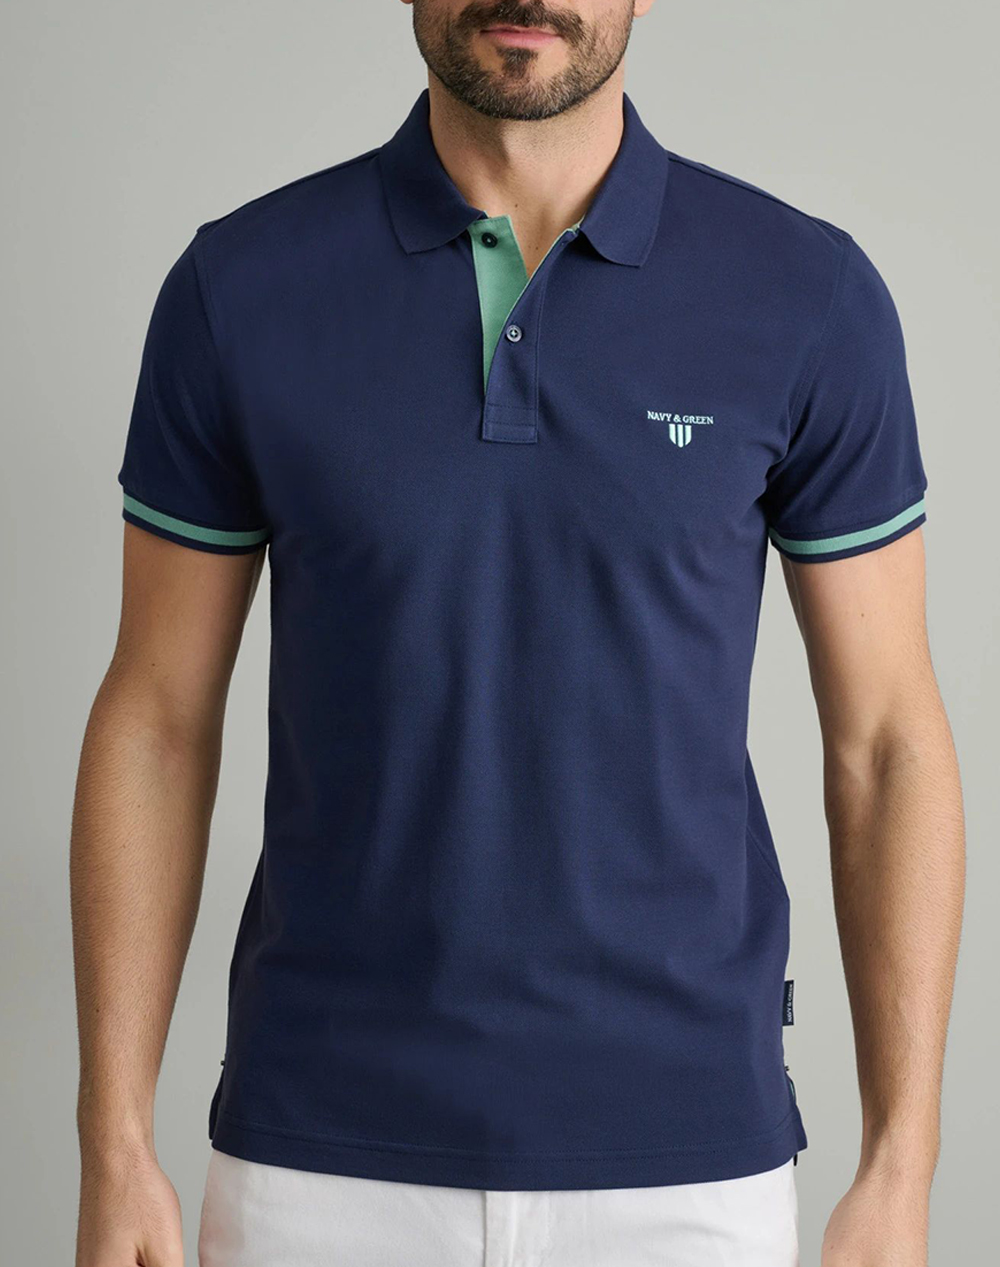 NAVY&GREEN POLO ΜΠΛΟΥΖΑΚΙ-YOUNG LINE 24GE.879/YL.2-MD BLUE DarkBlue